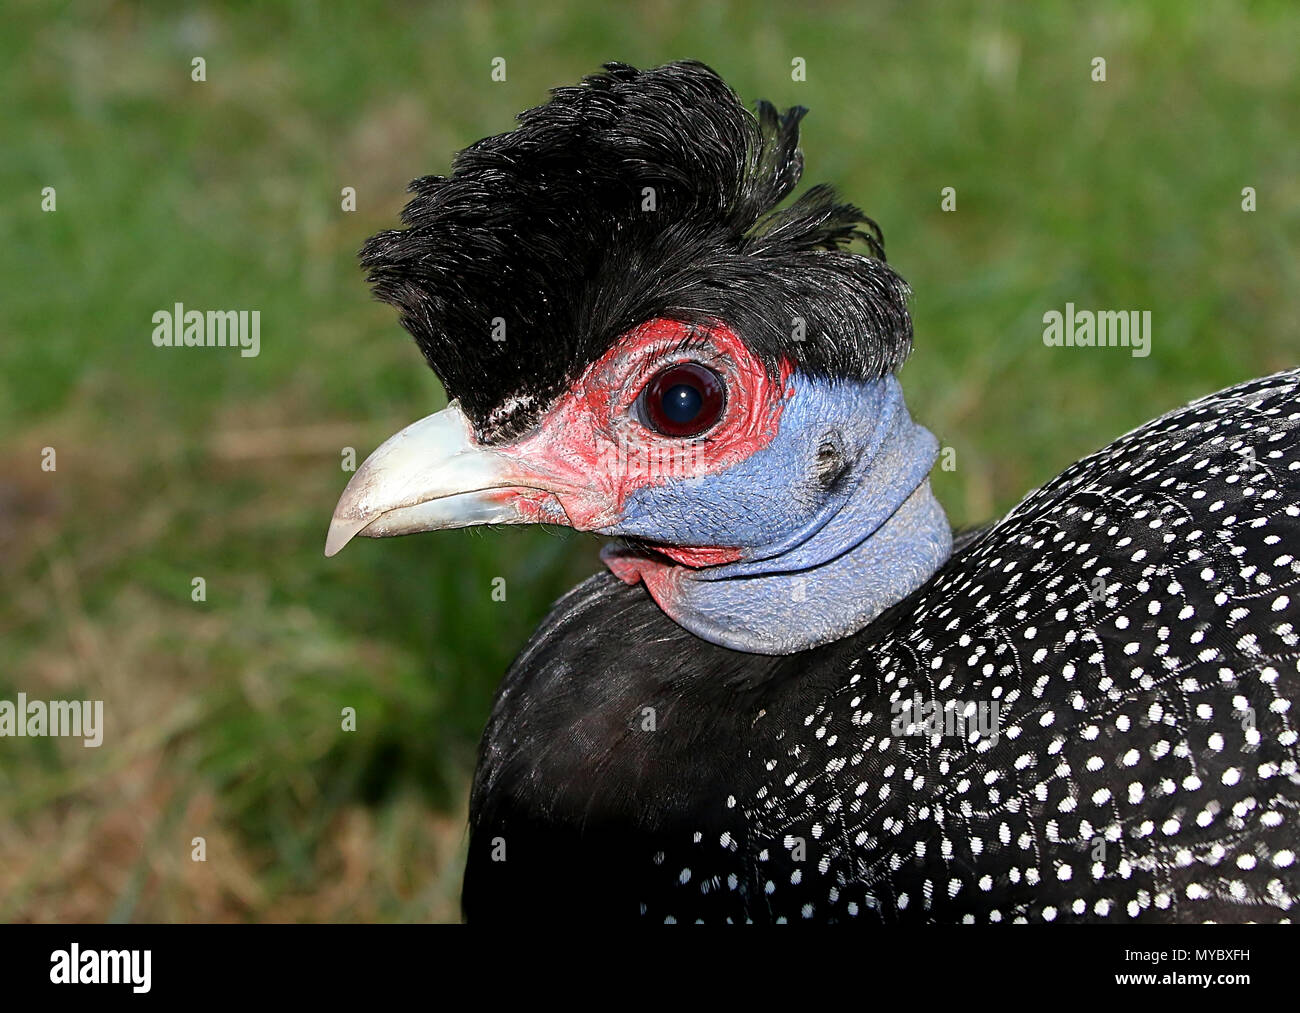 African Crested guineafowl (Guttera pucherani), close-up of the head Stock Photo